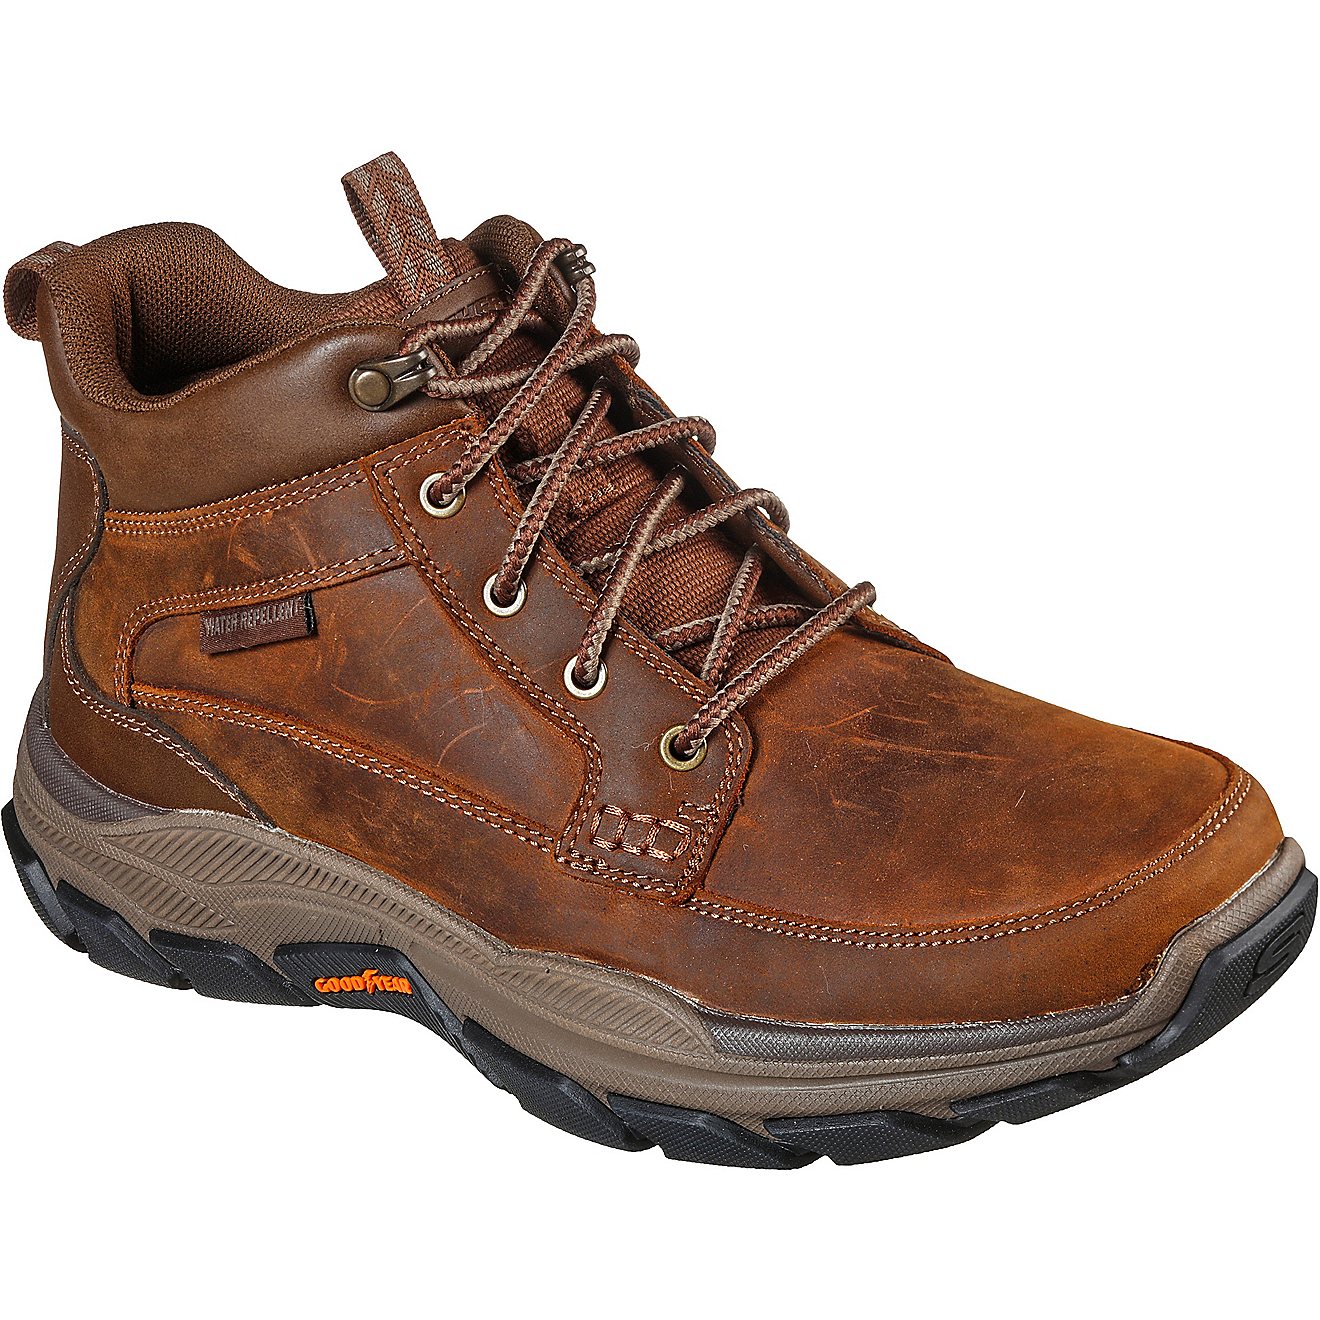 SKECHERS Men's Relaxed Fit Respected Boswell Shoes                                                                               - view number 3